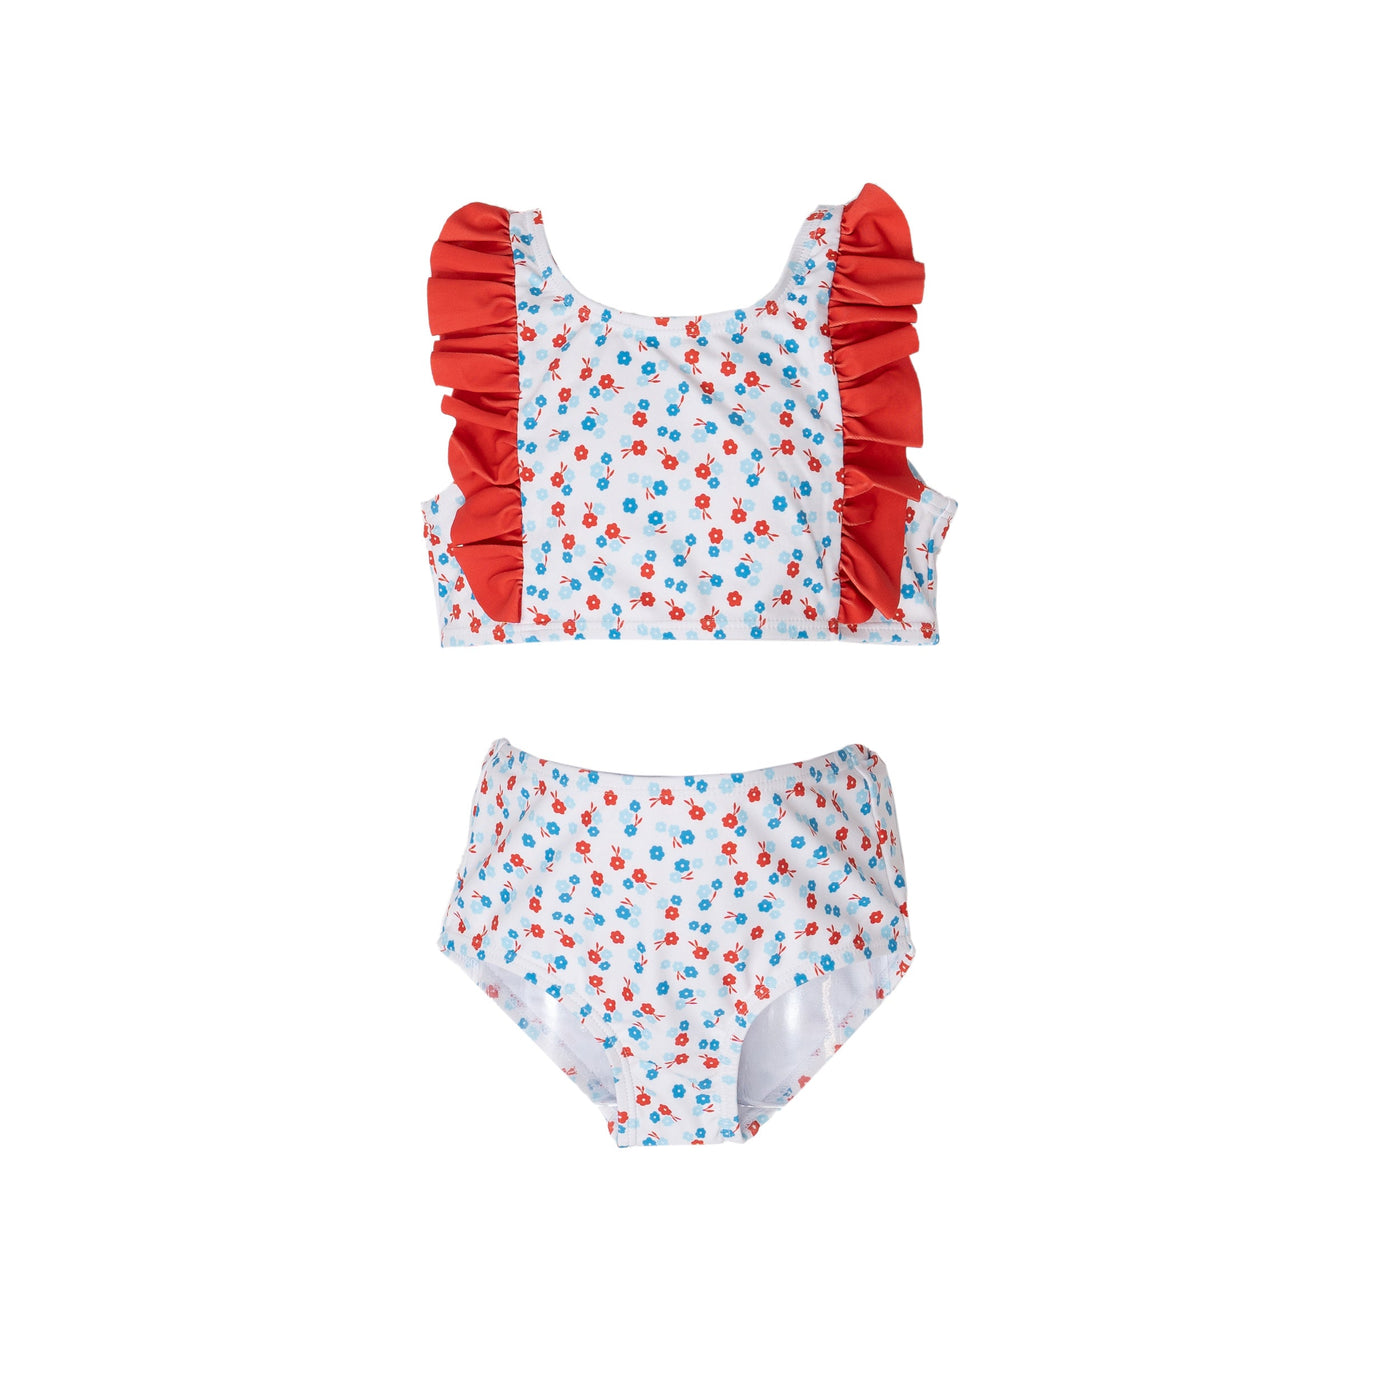 Pinnacle Port Red White & Blue Floral 2 Pc